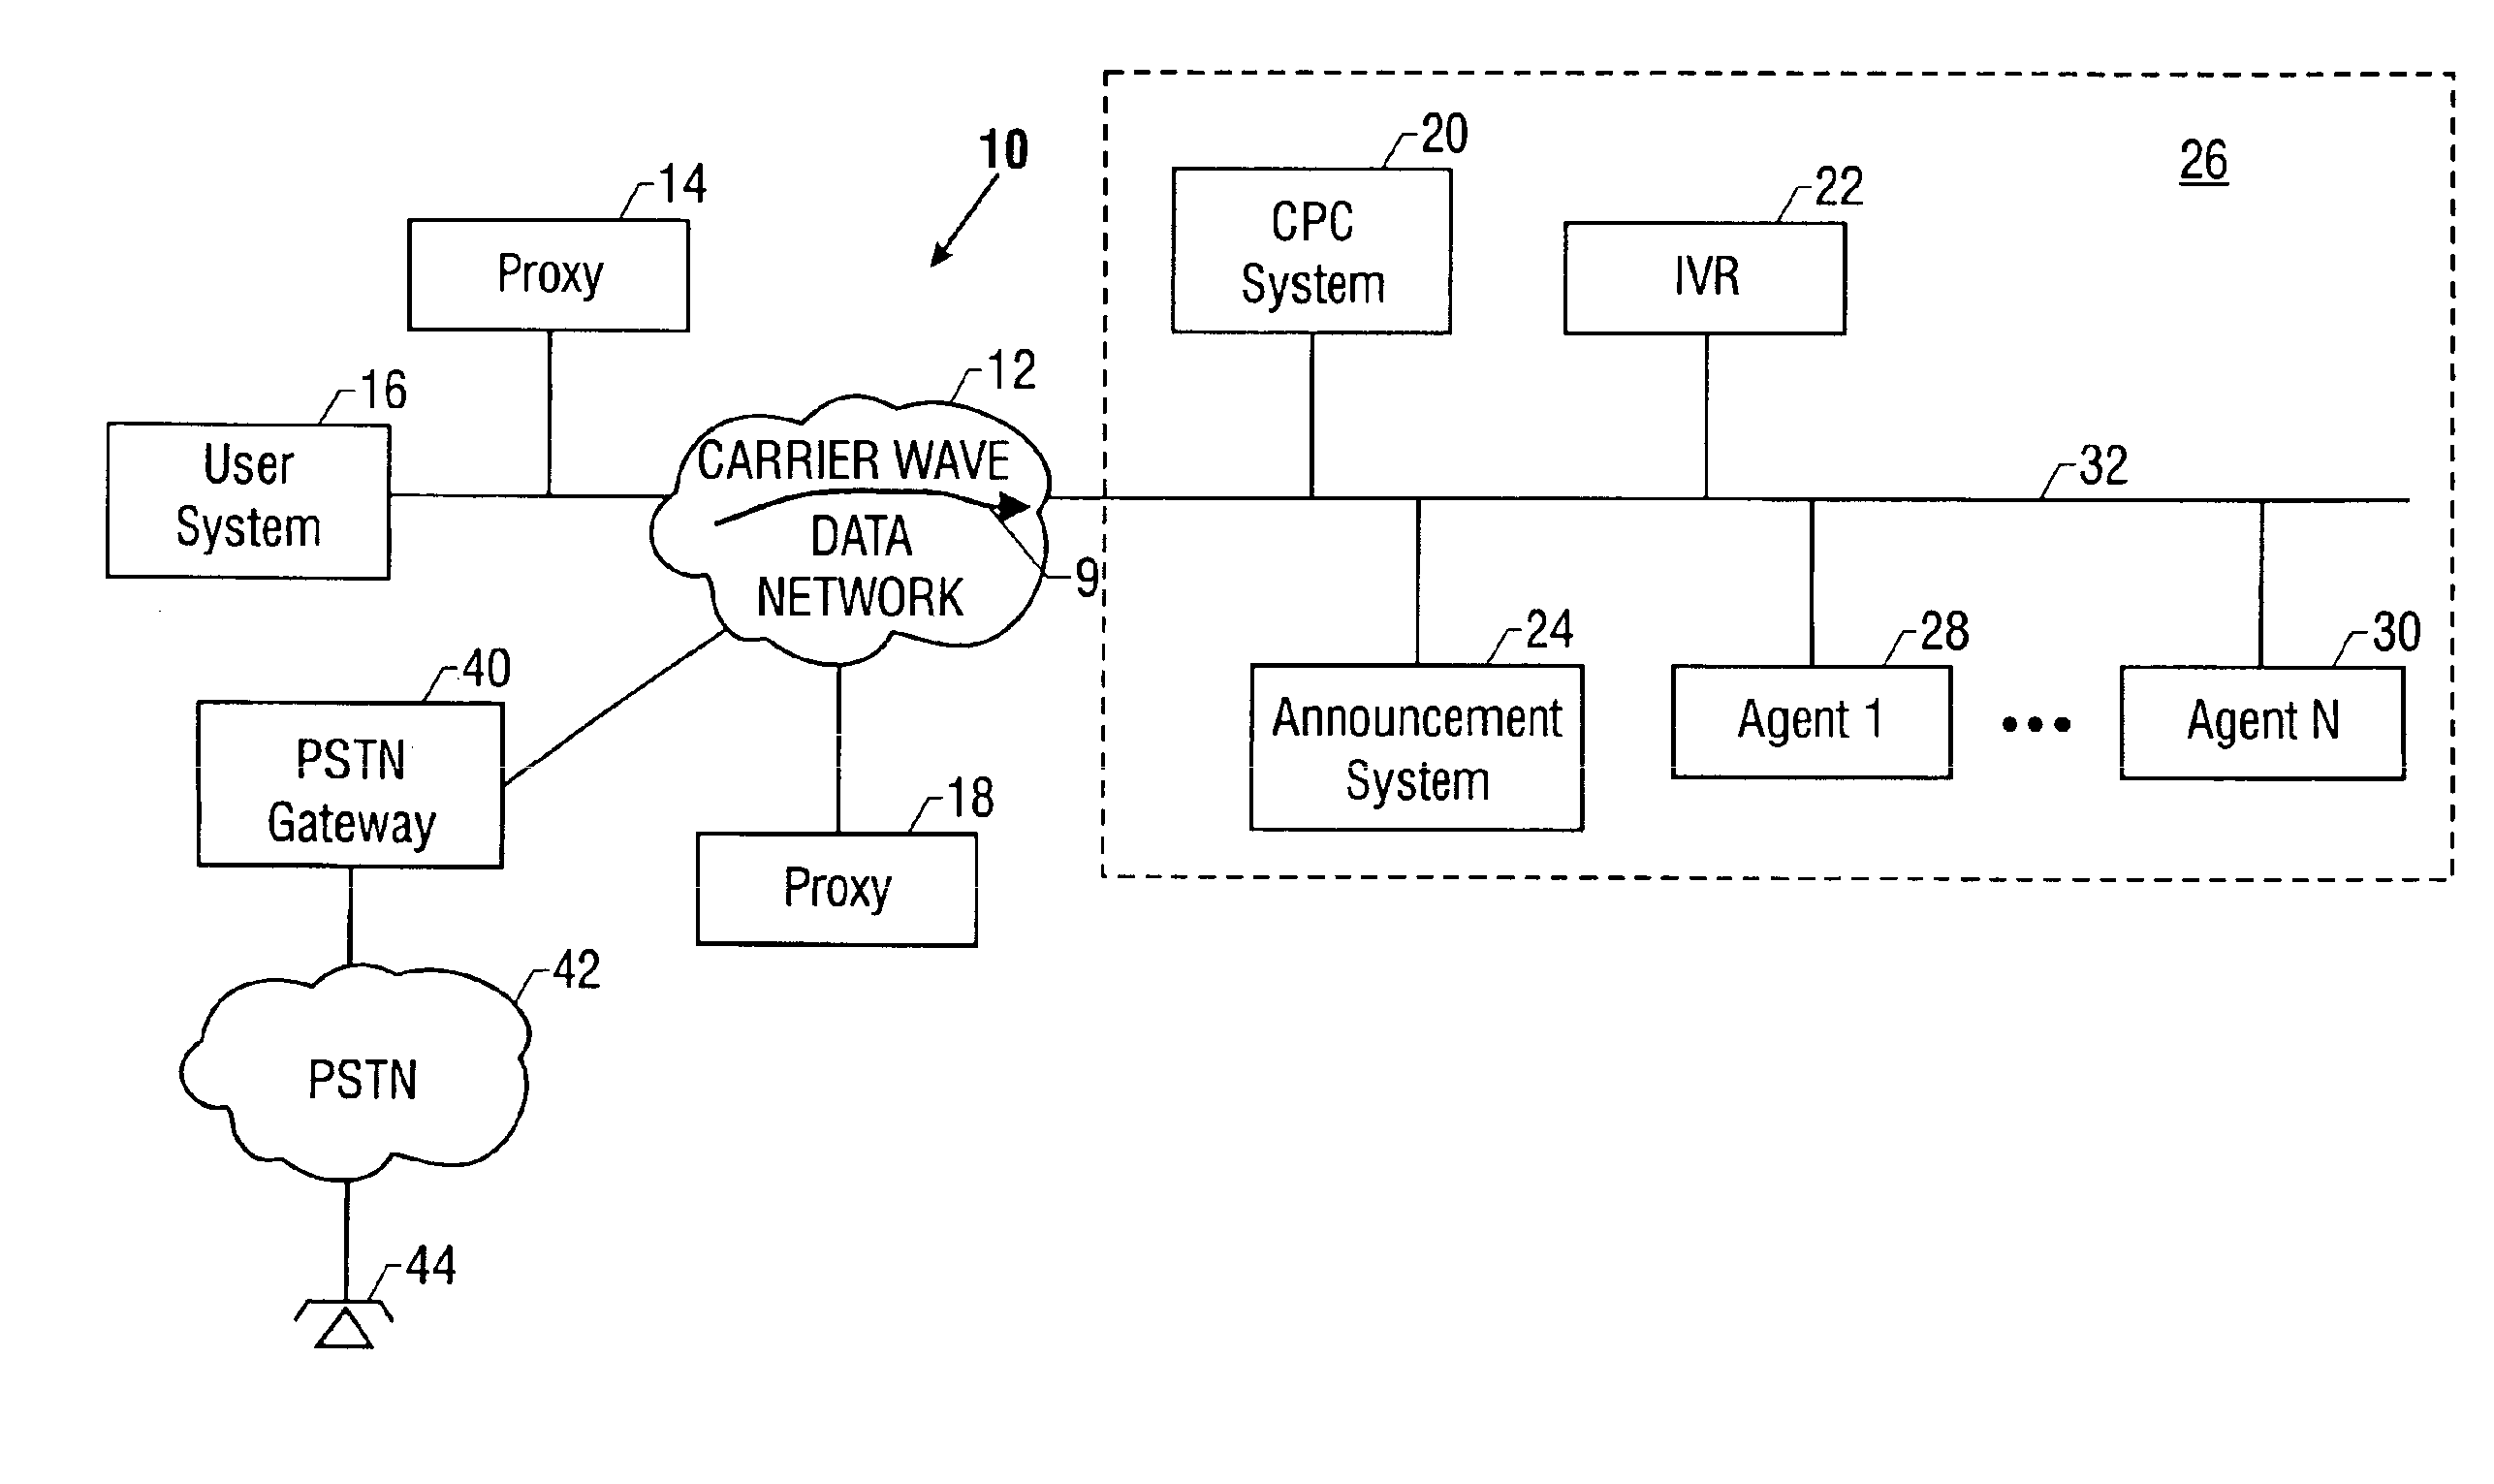 Method and apparatus for call processing in response to a call request from an originating device